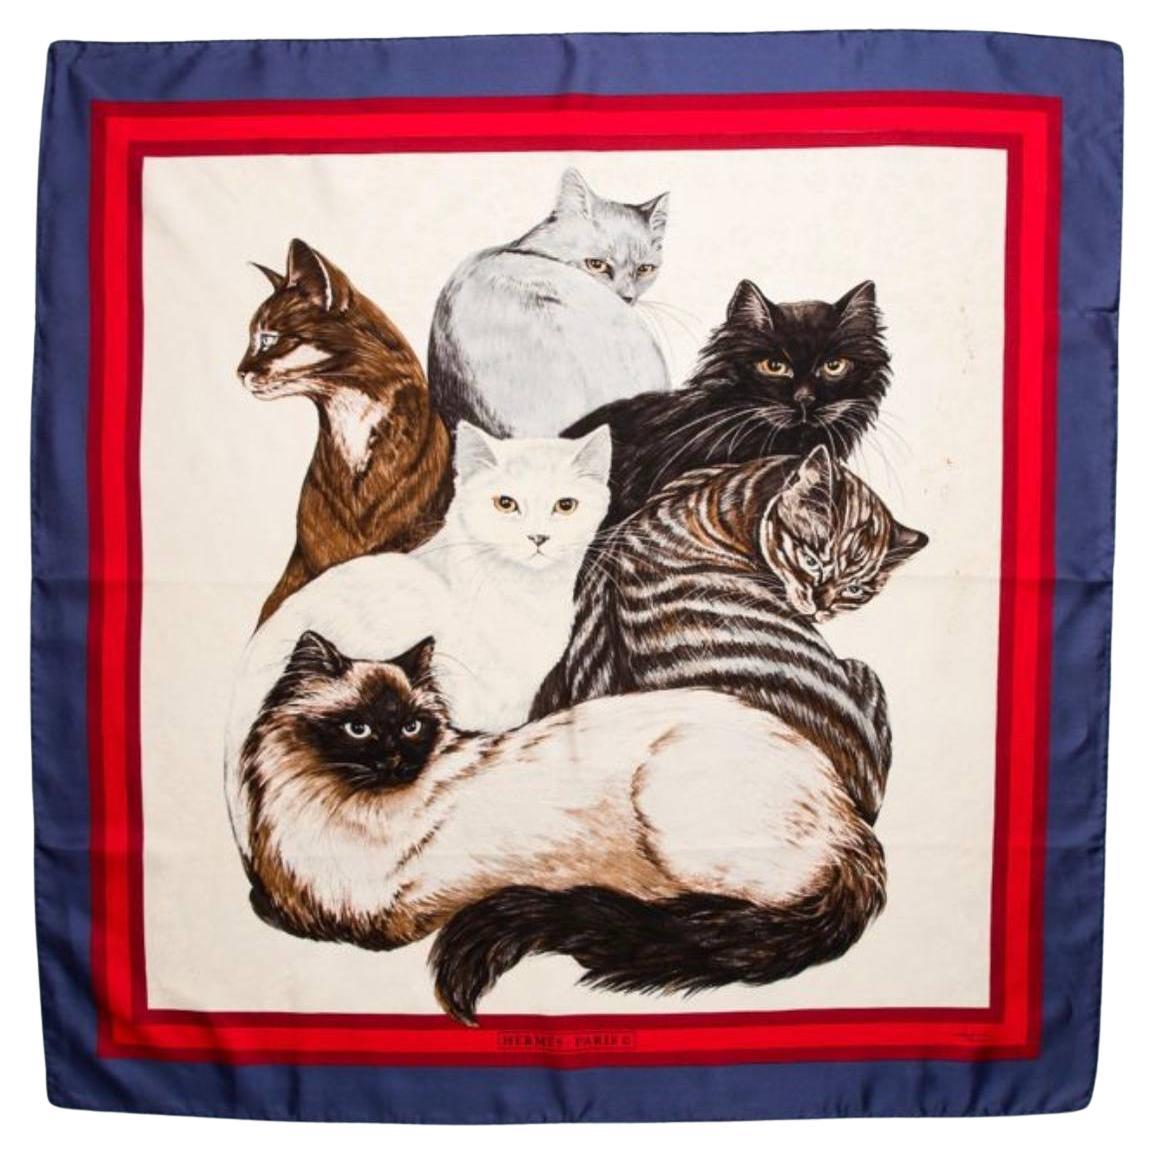 Vintage Hermes Les Chats Scarf by Daphne Duchesne 1985 For Sale